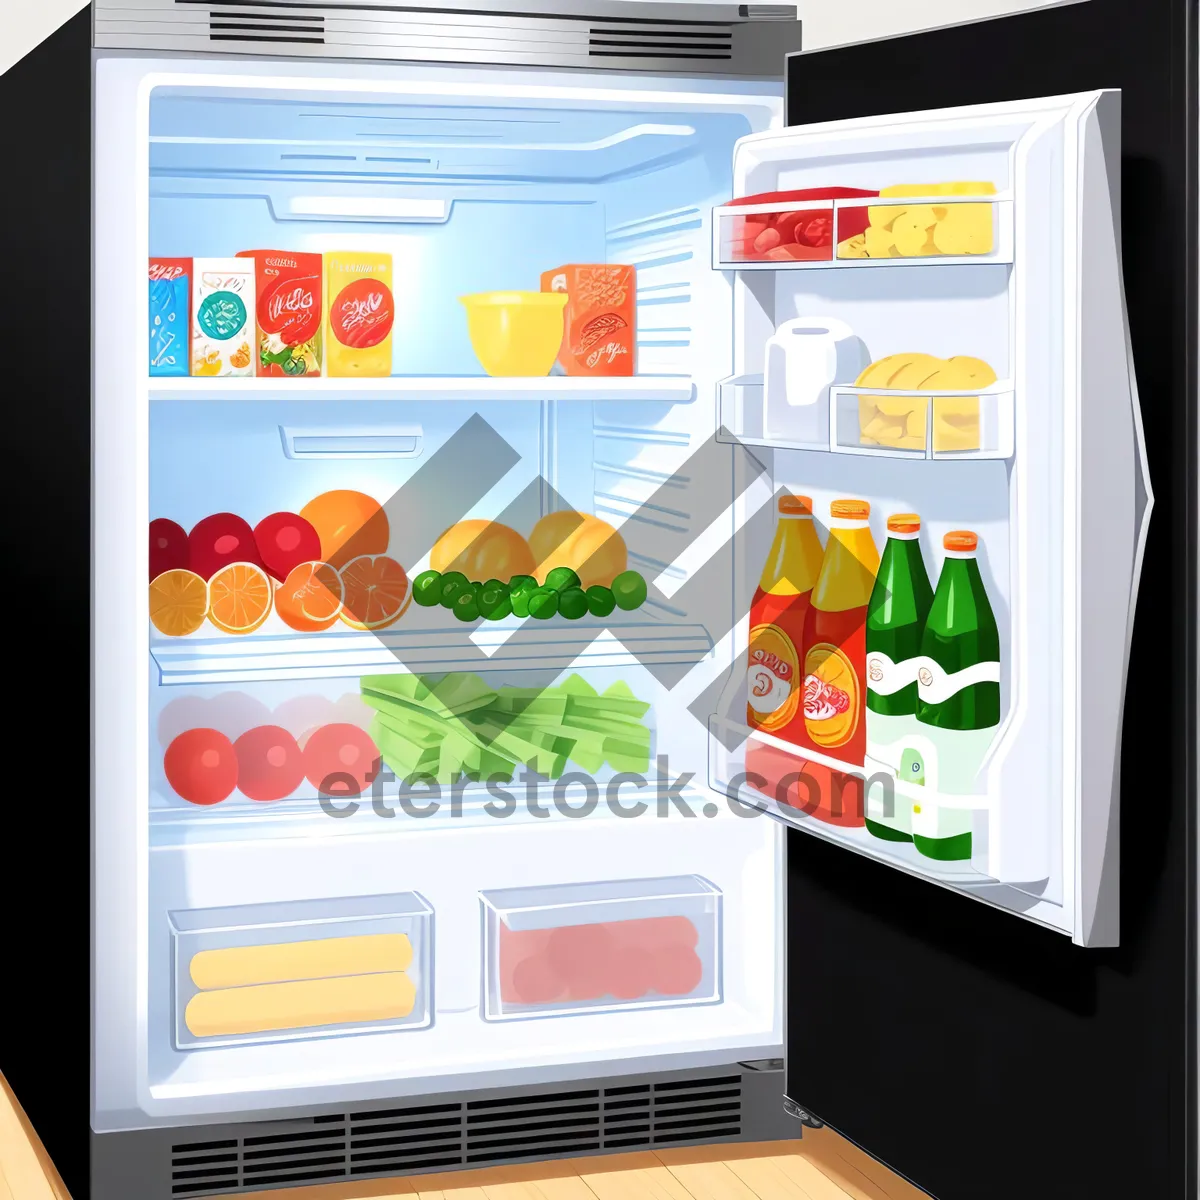 Picture of Modern Home Appliance: White Goods Refrigerator with Built-in Computer Screen